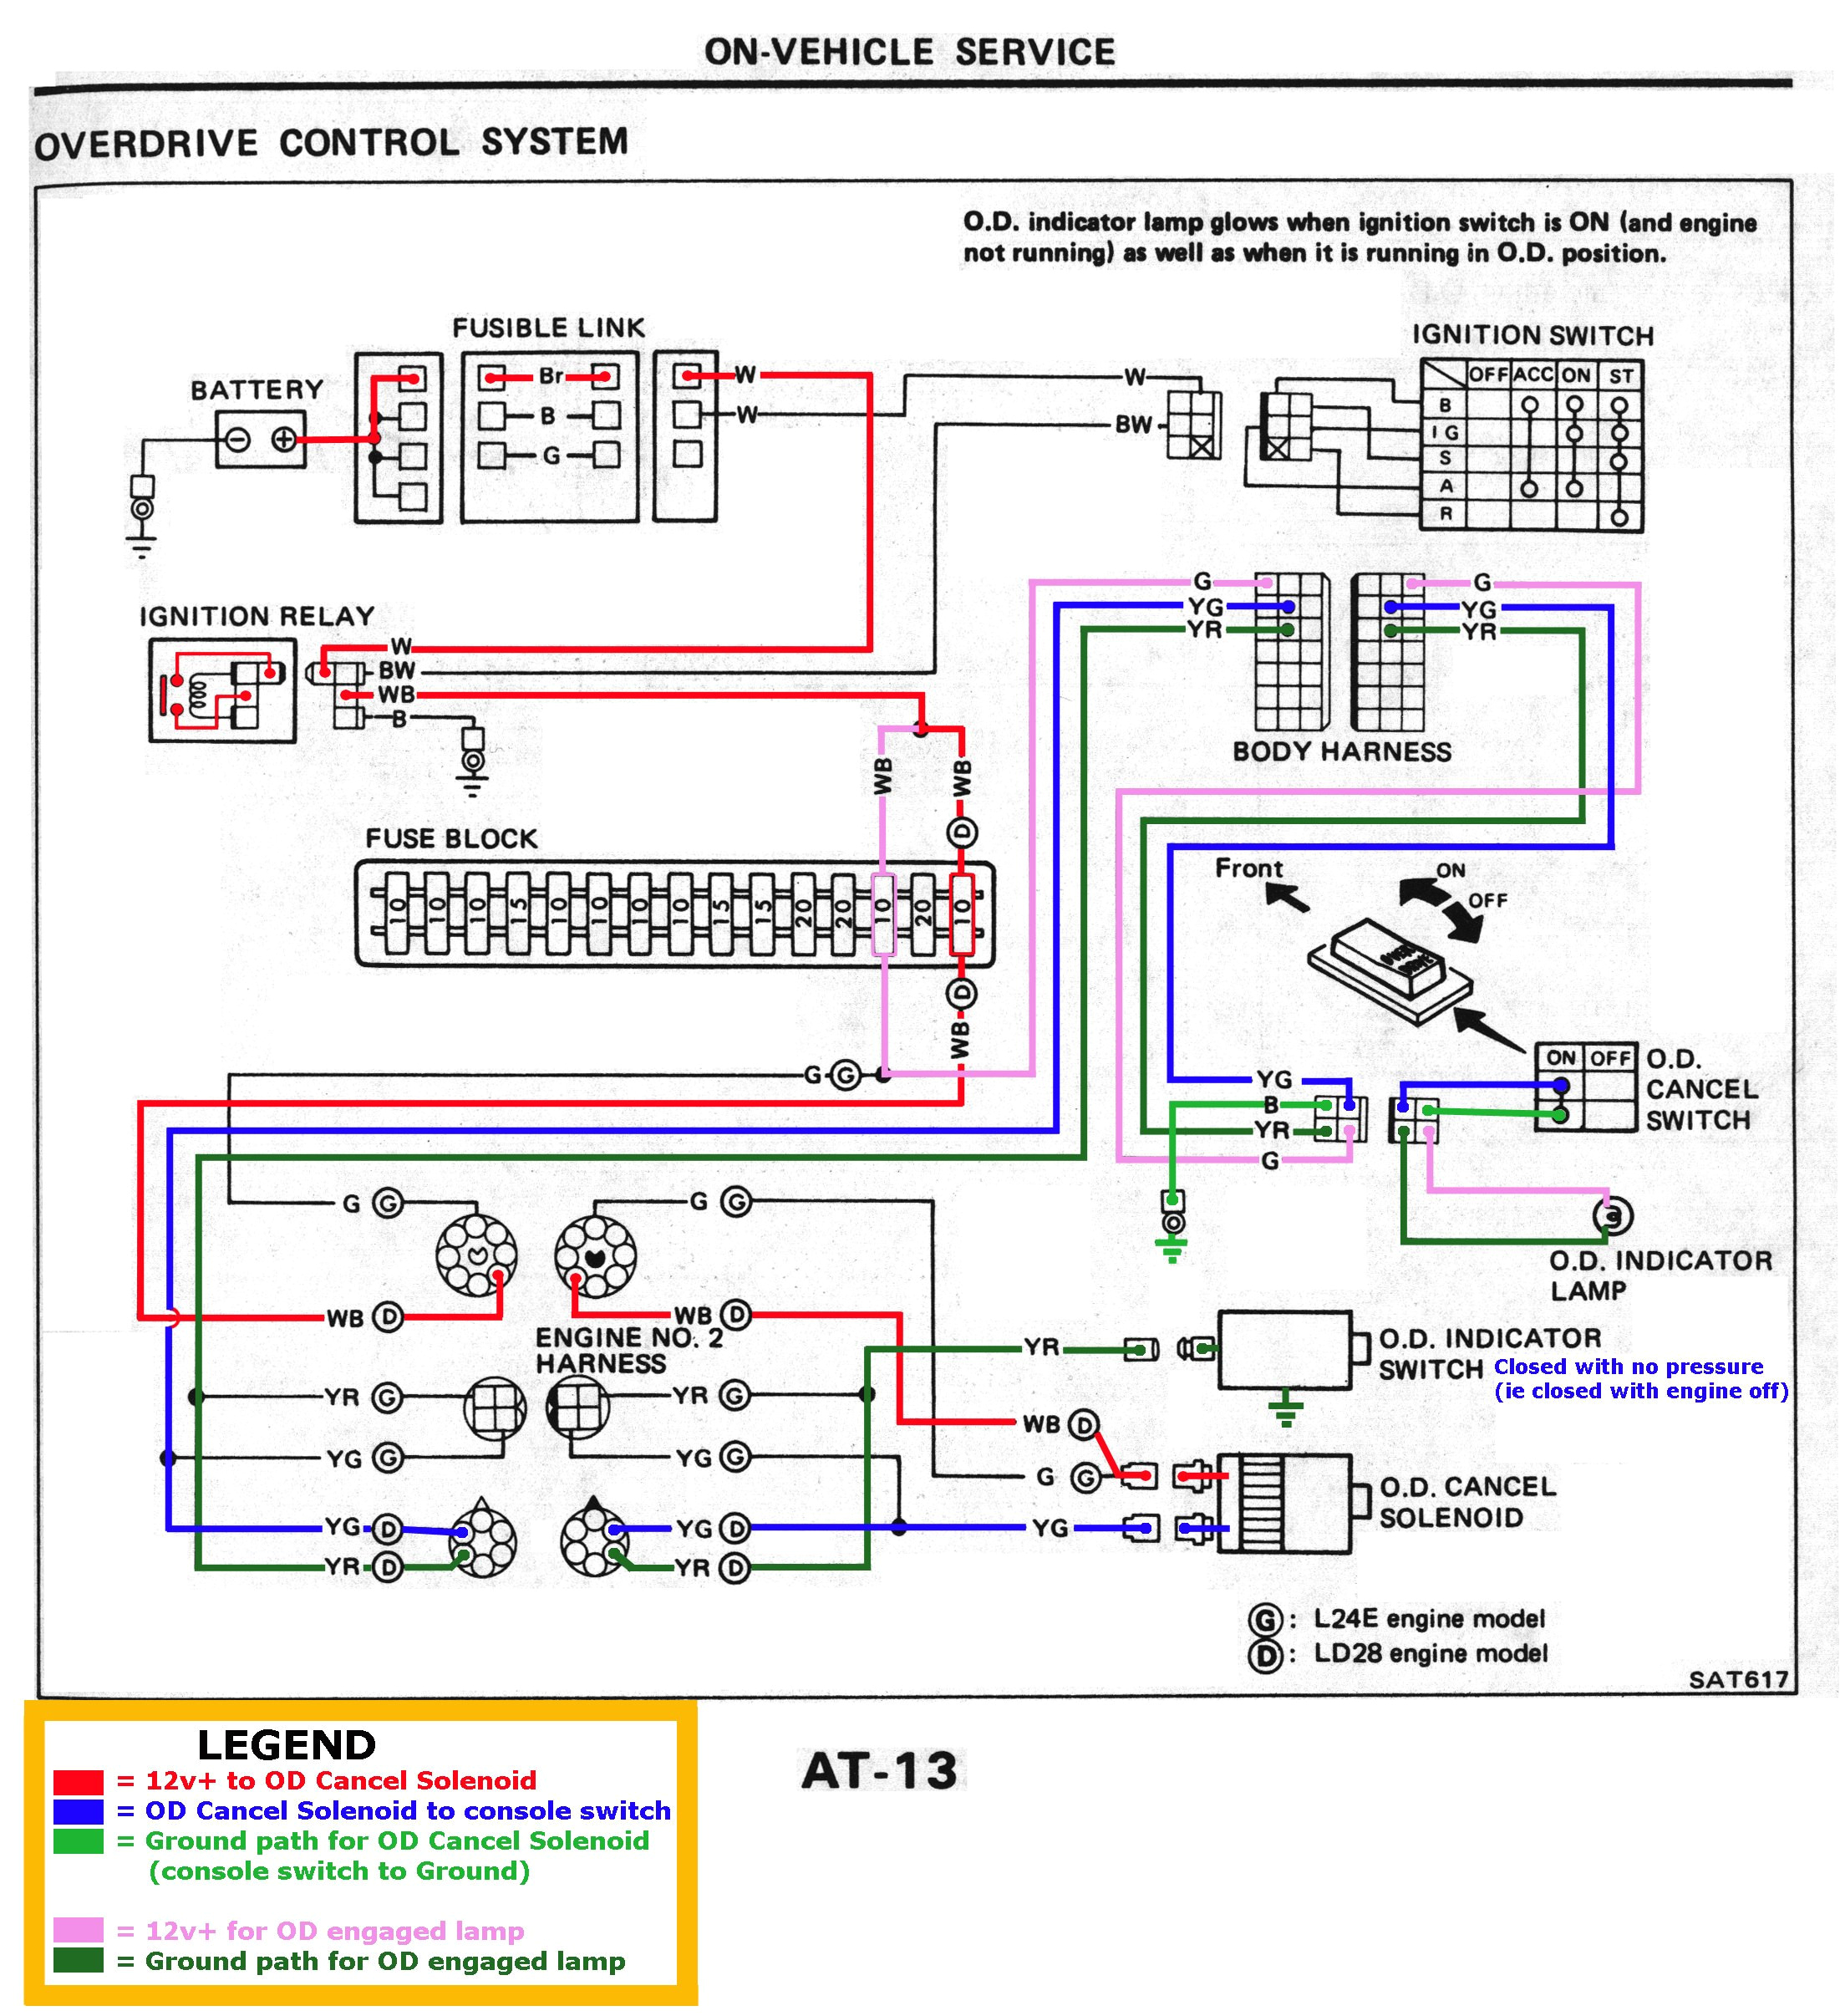 heater relay wiring diagram free download schematic data schematic motor relay wiring free image about wiring diagram and schematic